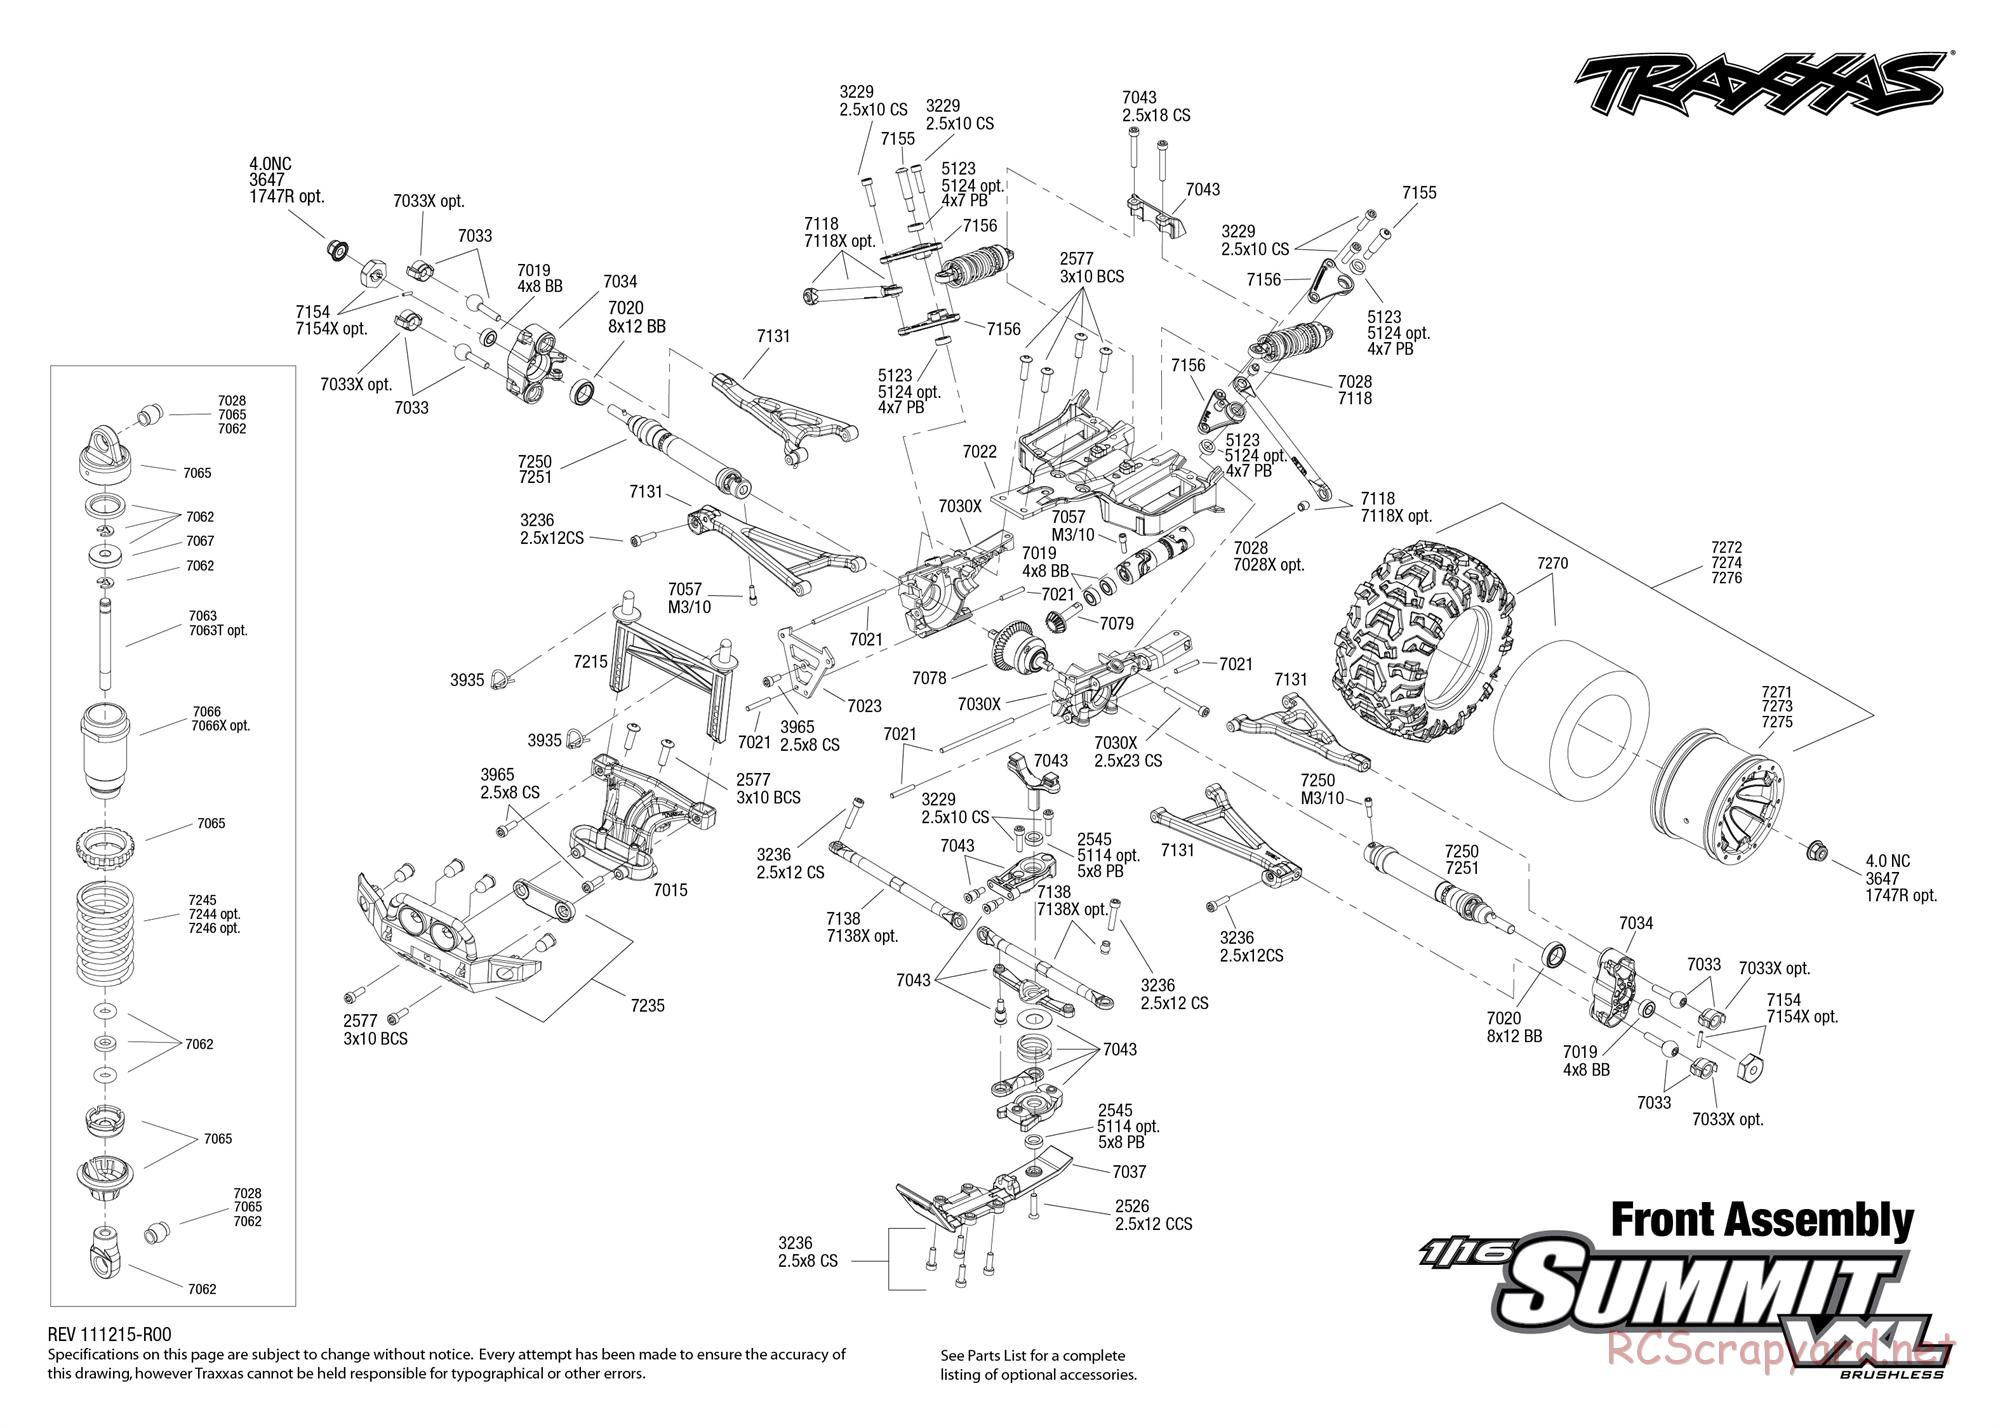 Traxxas - 1/16 Summit VXL (2010) - Exploded Views - Page 3